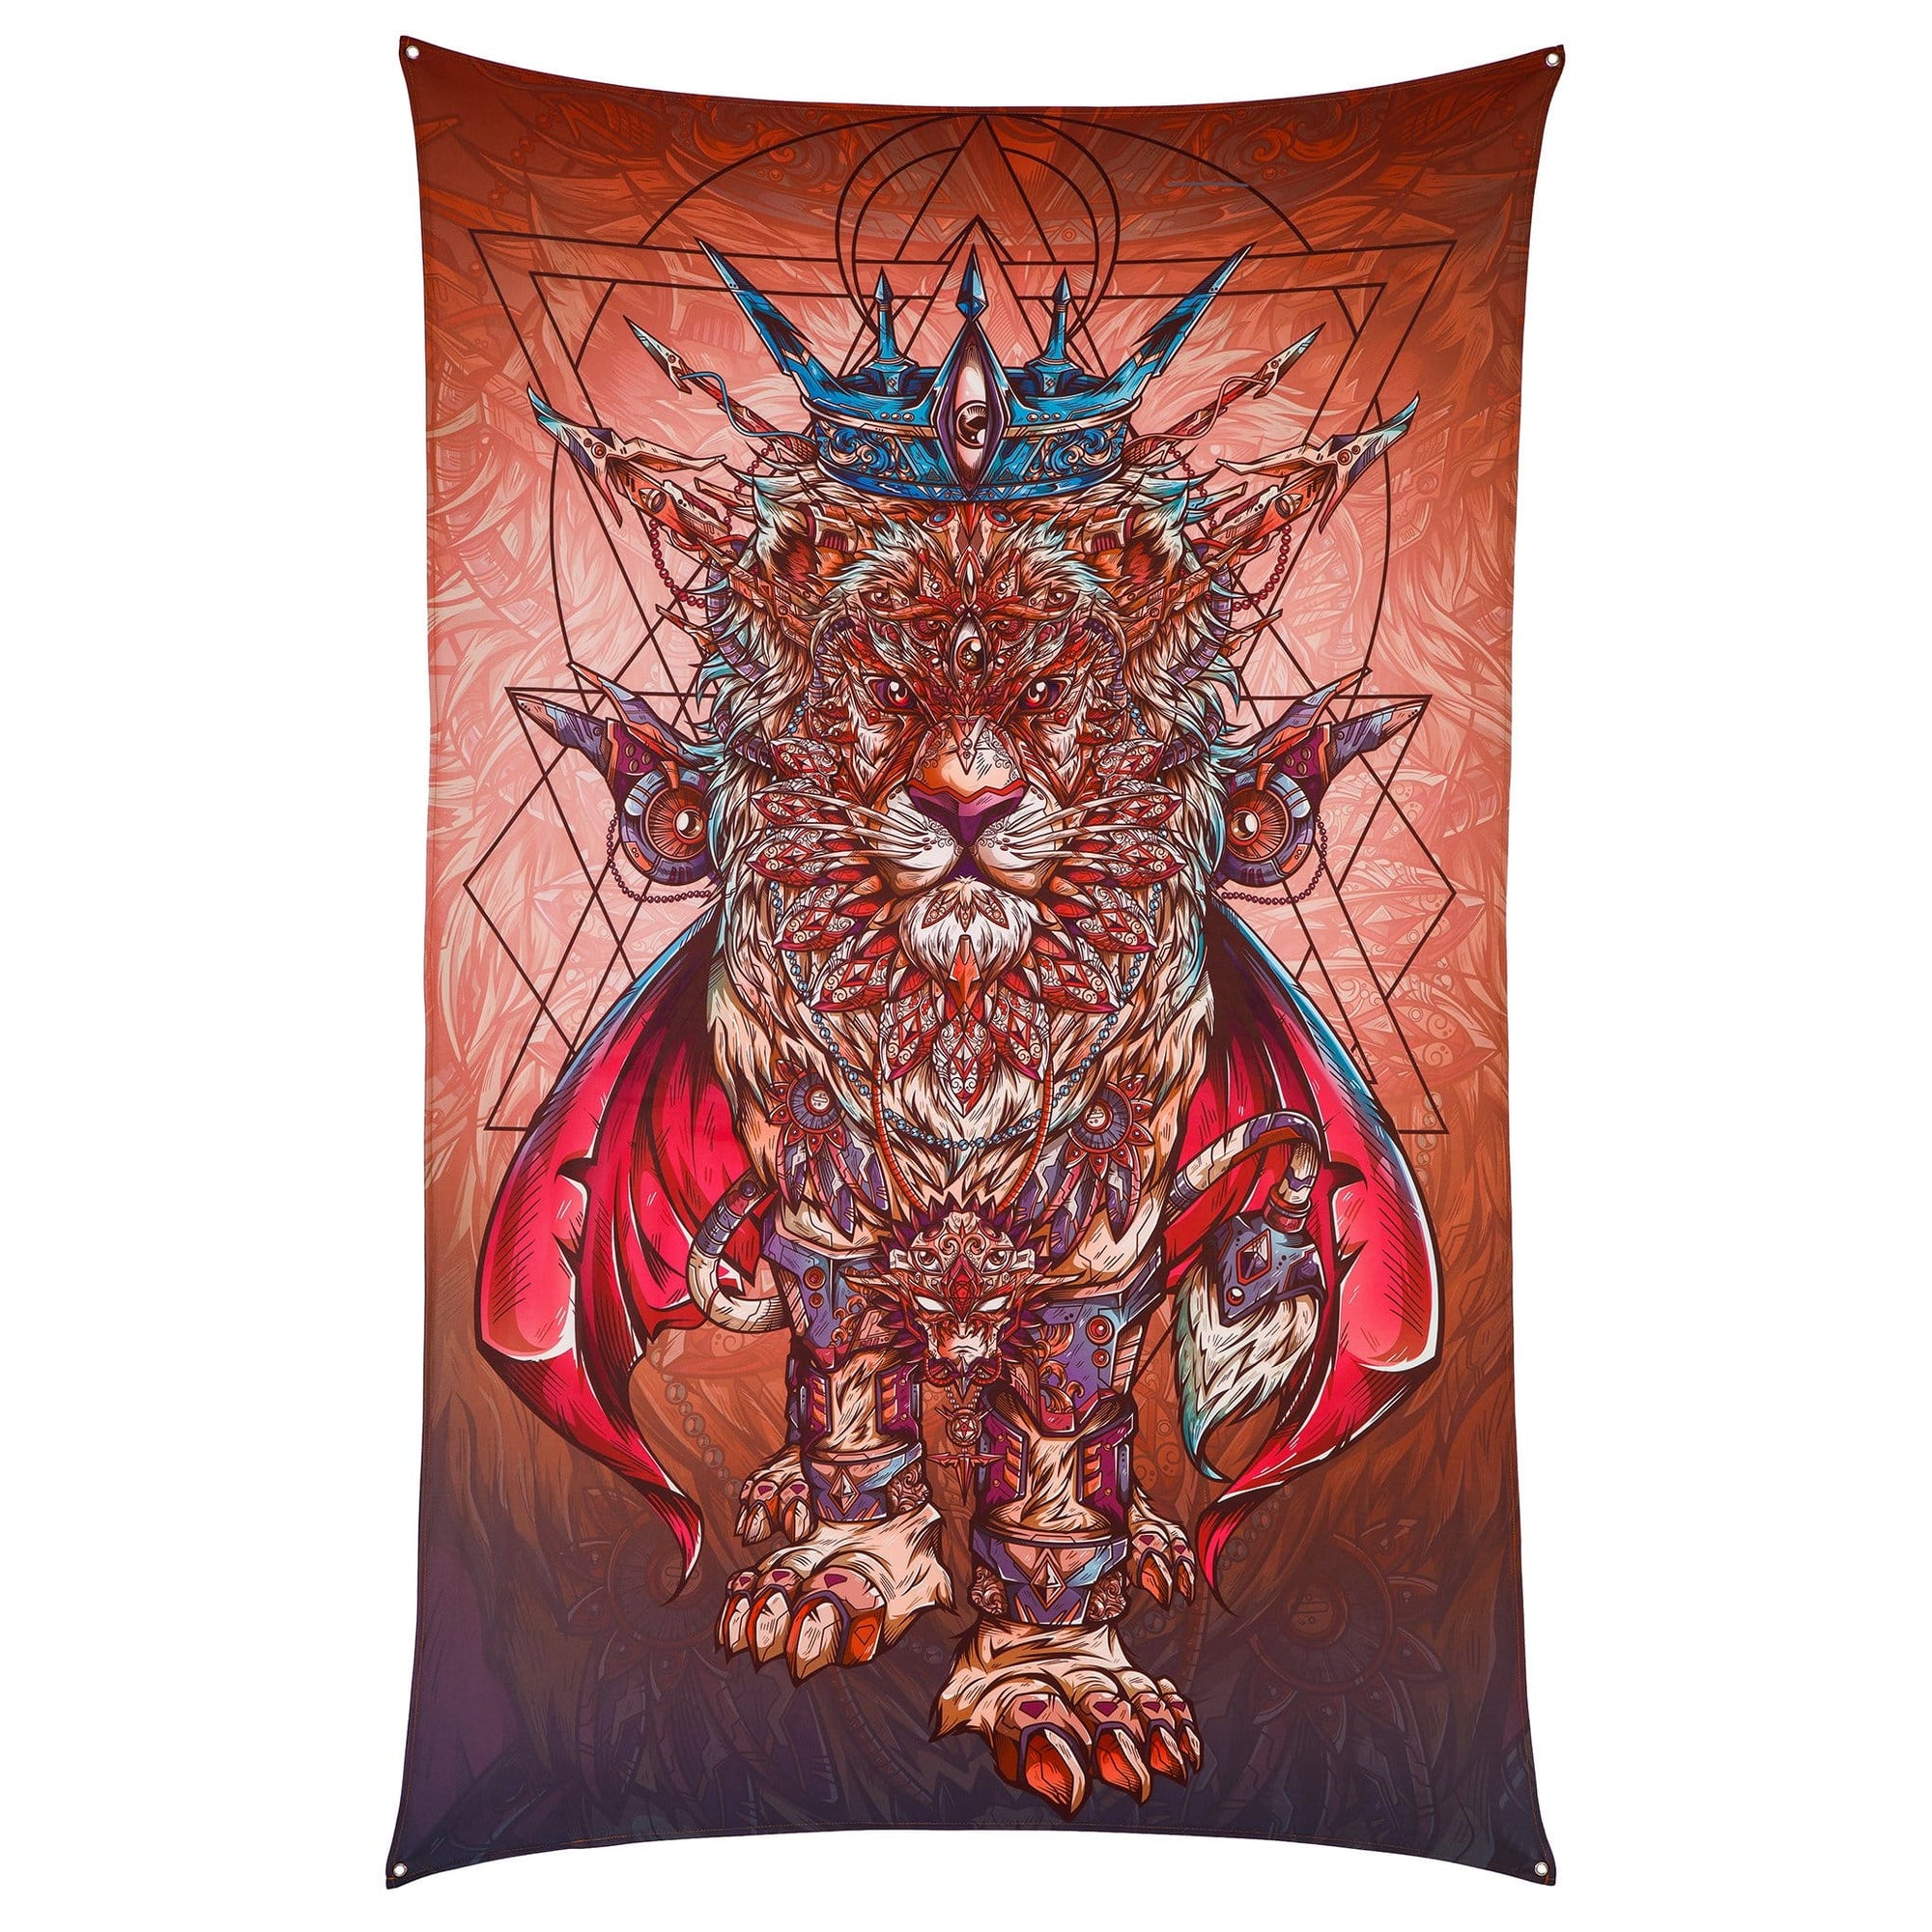 The King of Dreams Tapestry